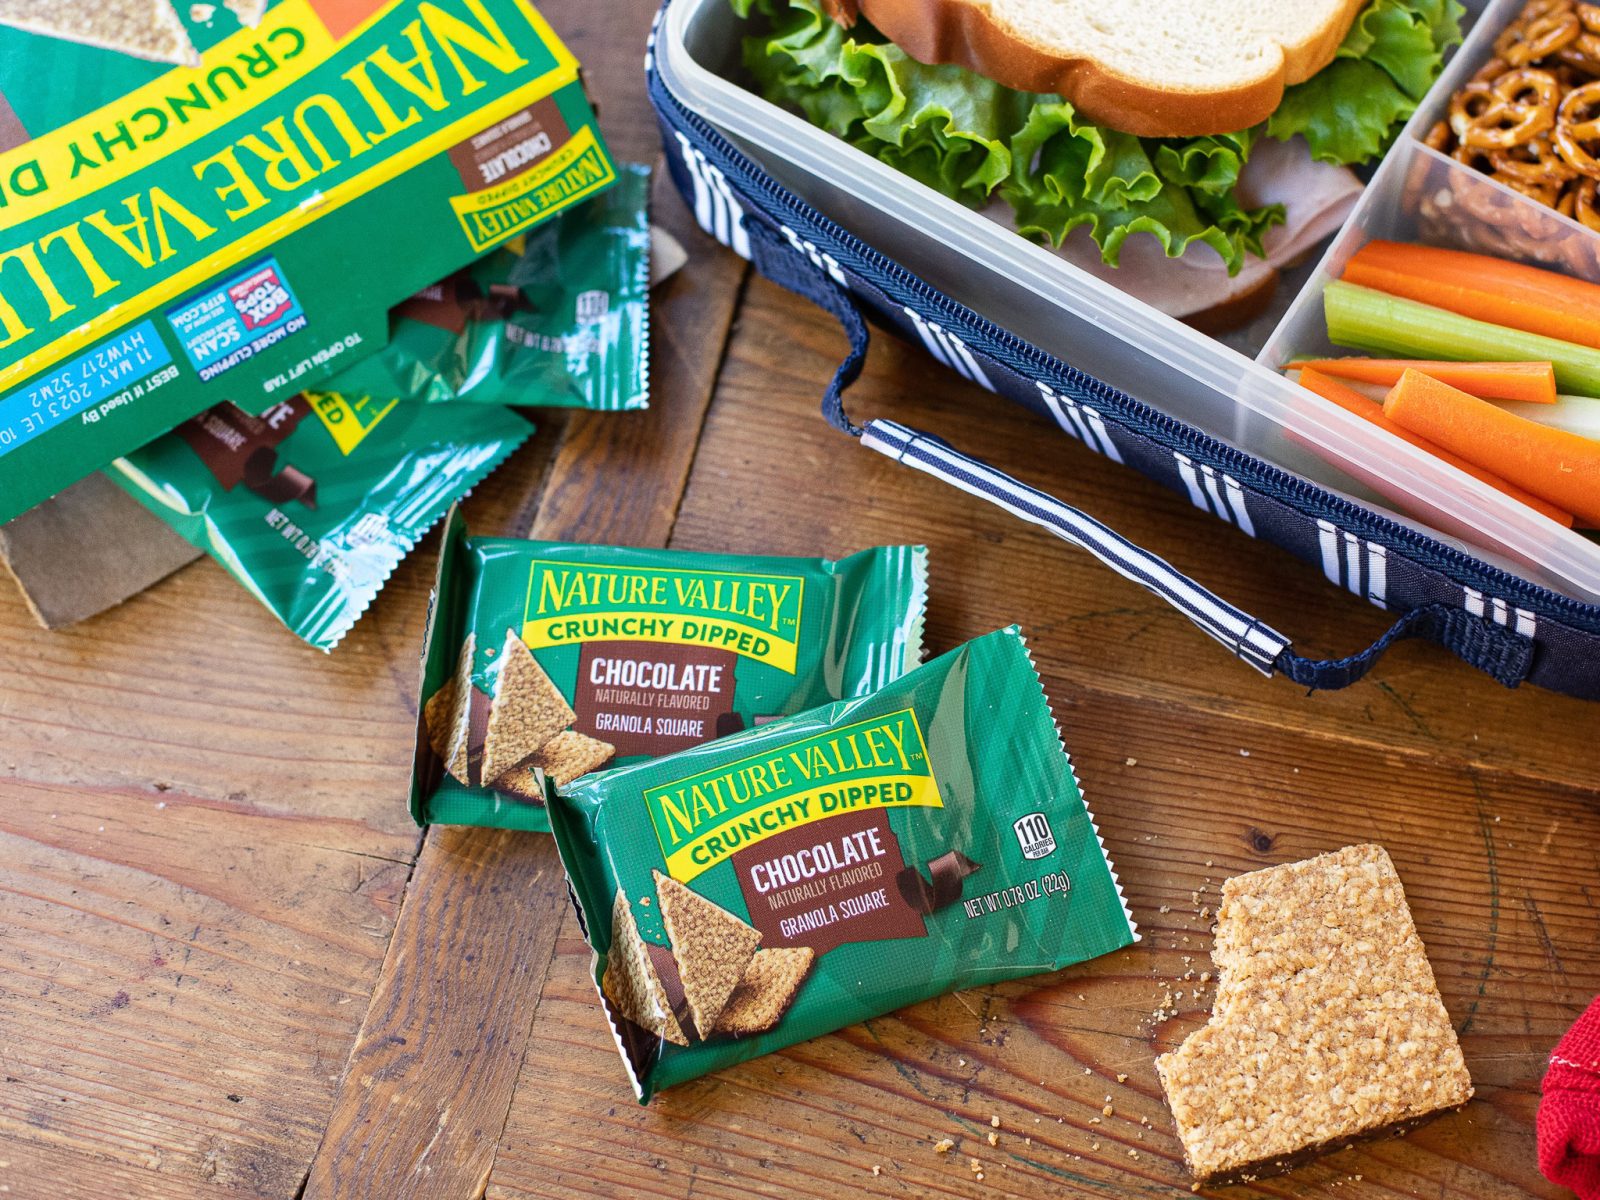 Nature Valley Bars As Low As $2.33 At Kroger – Plus Get FREE Milk